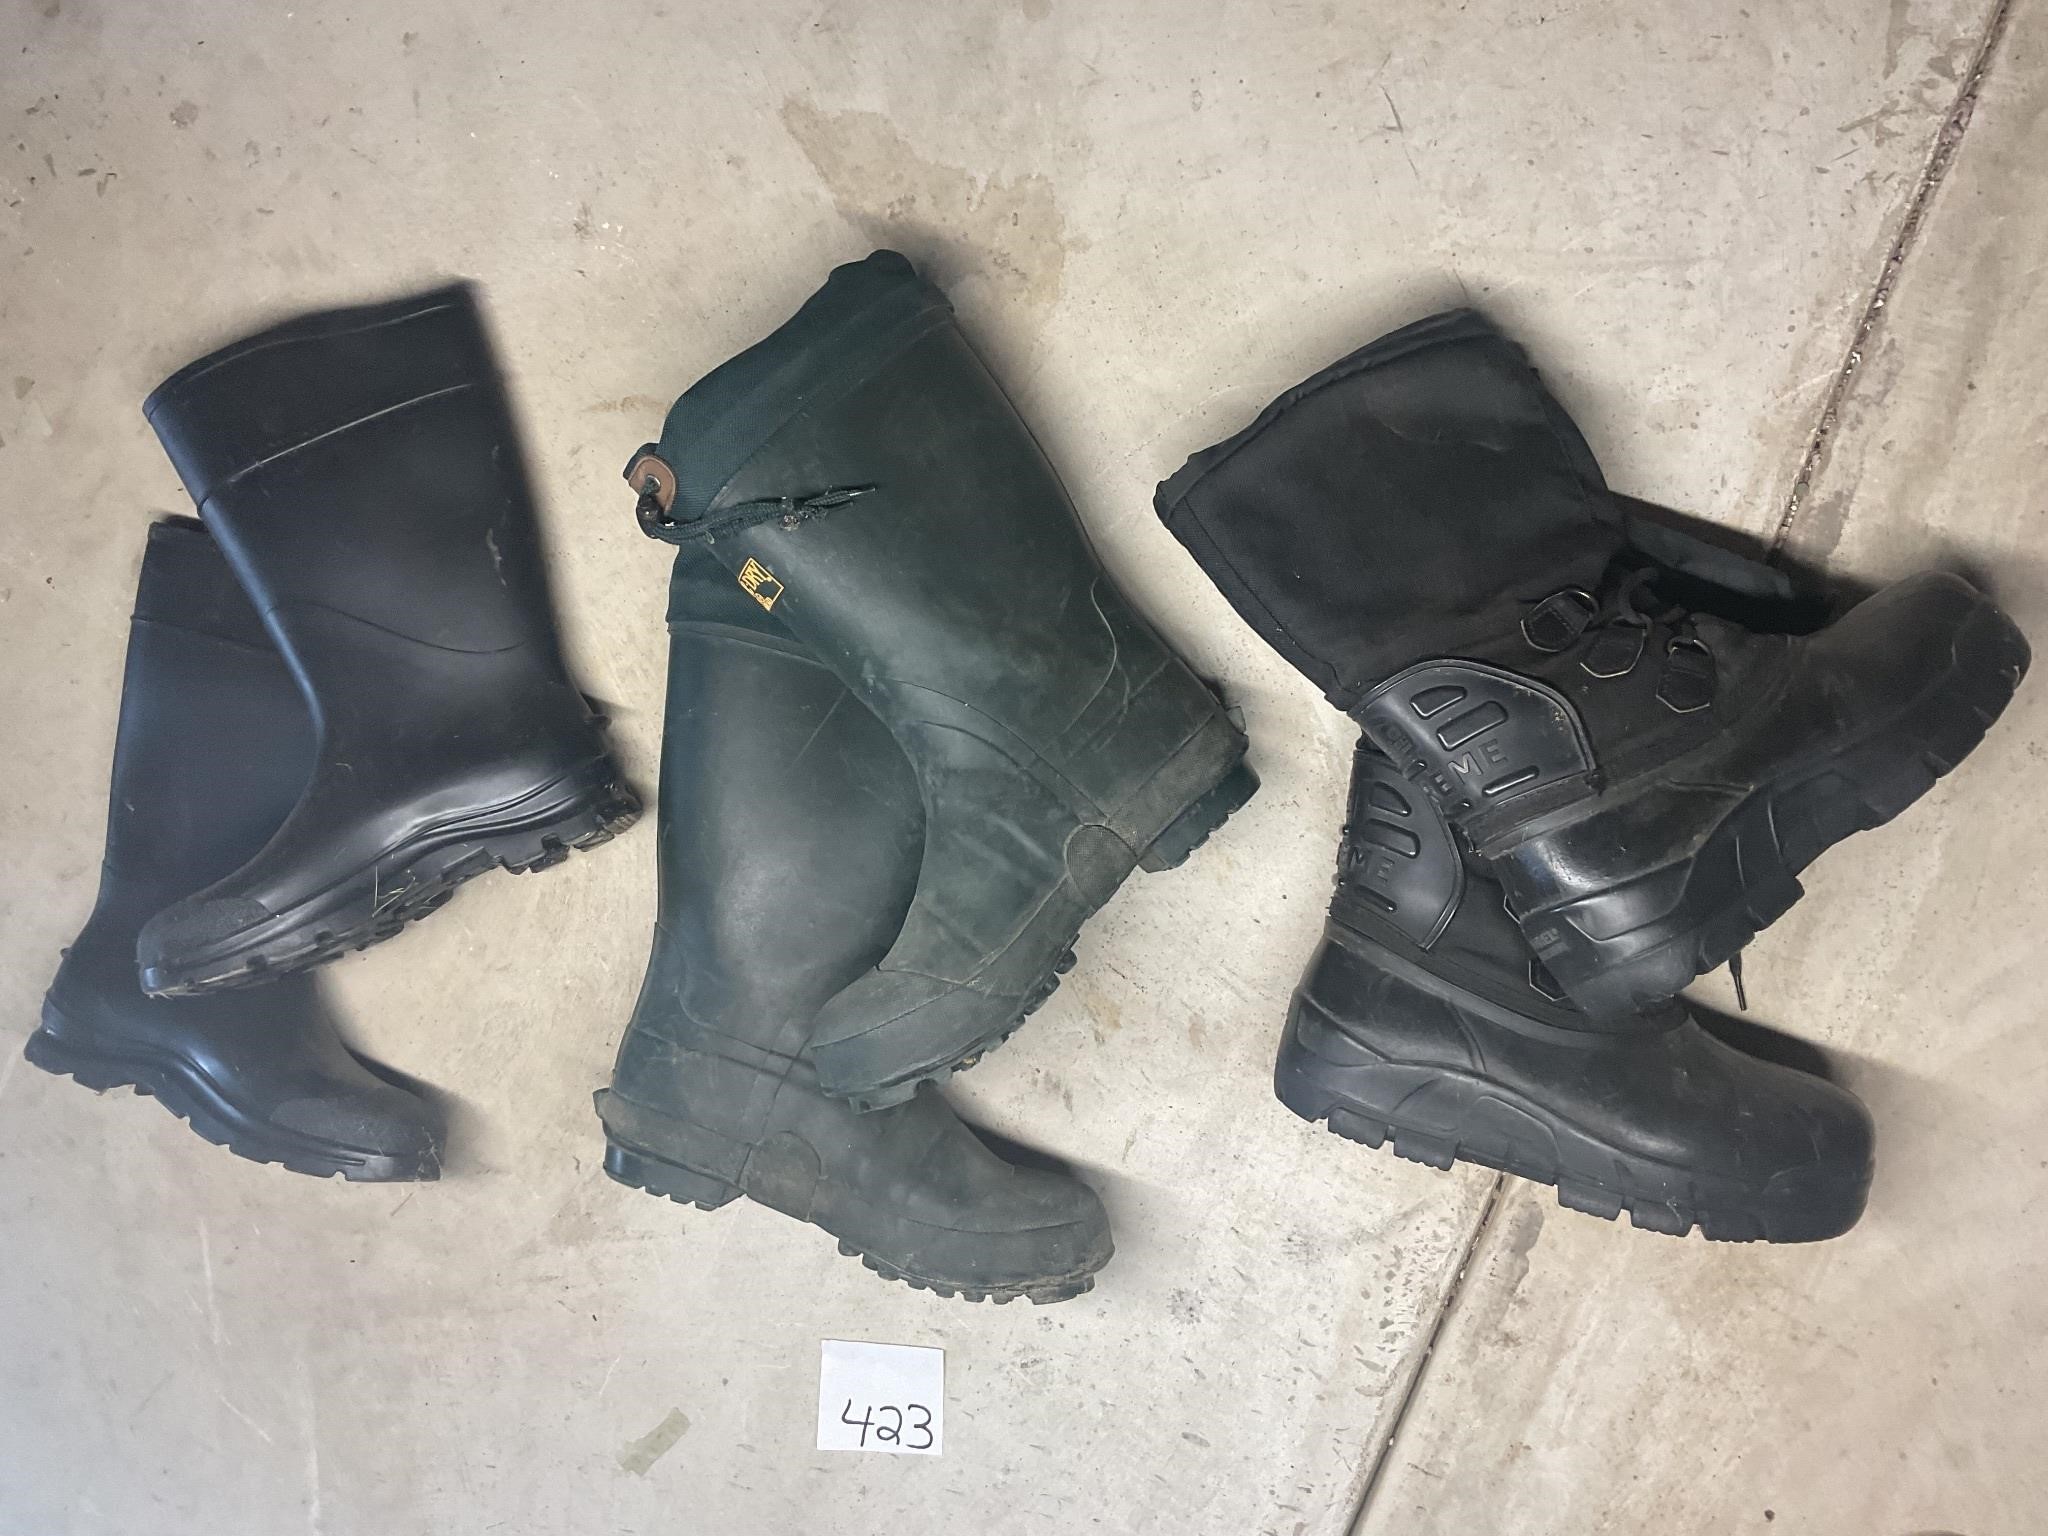 Three pairs of size 8 boots